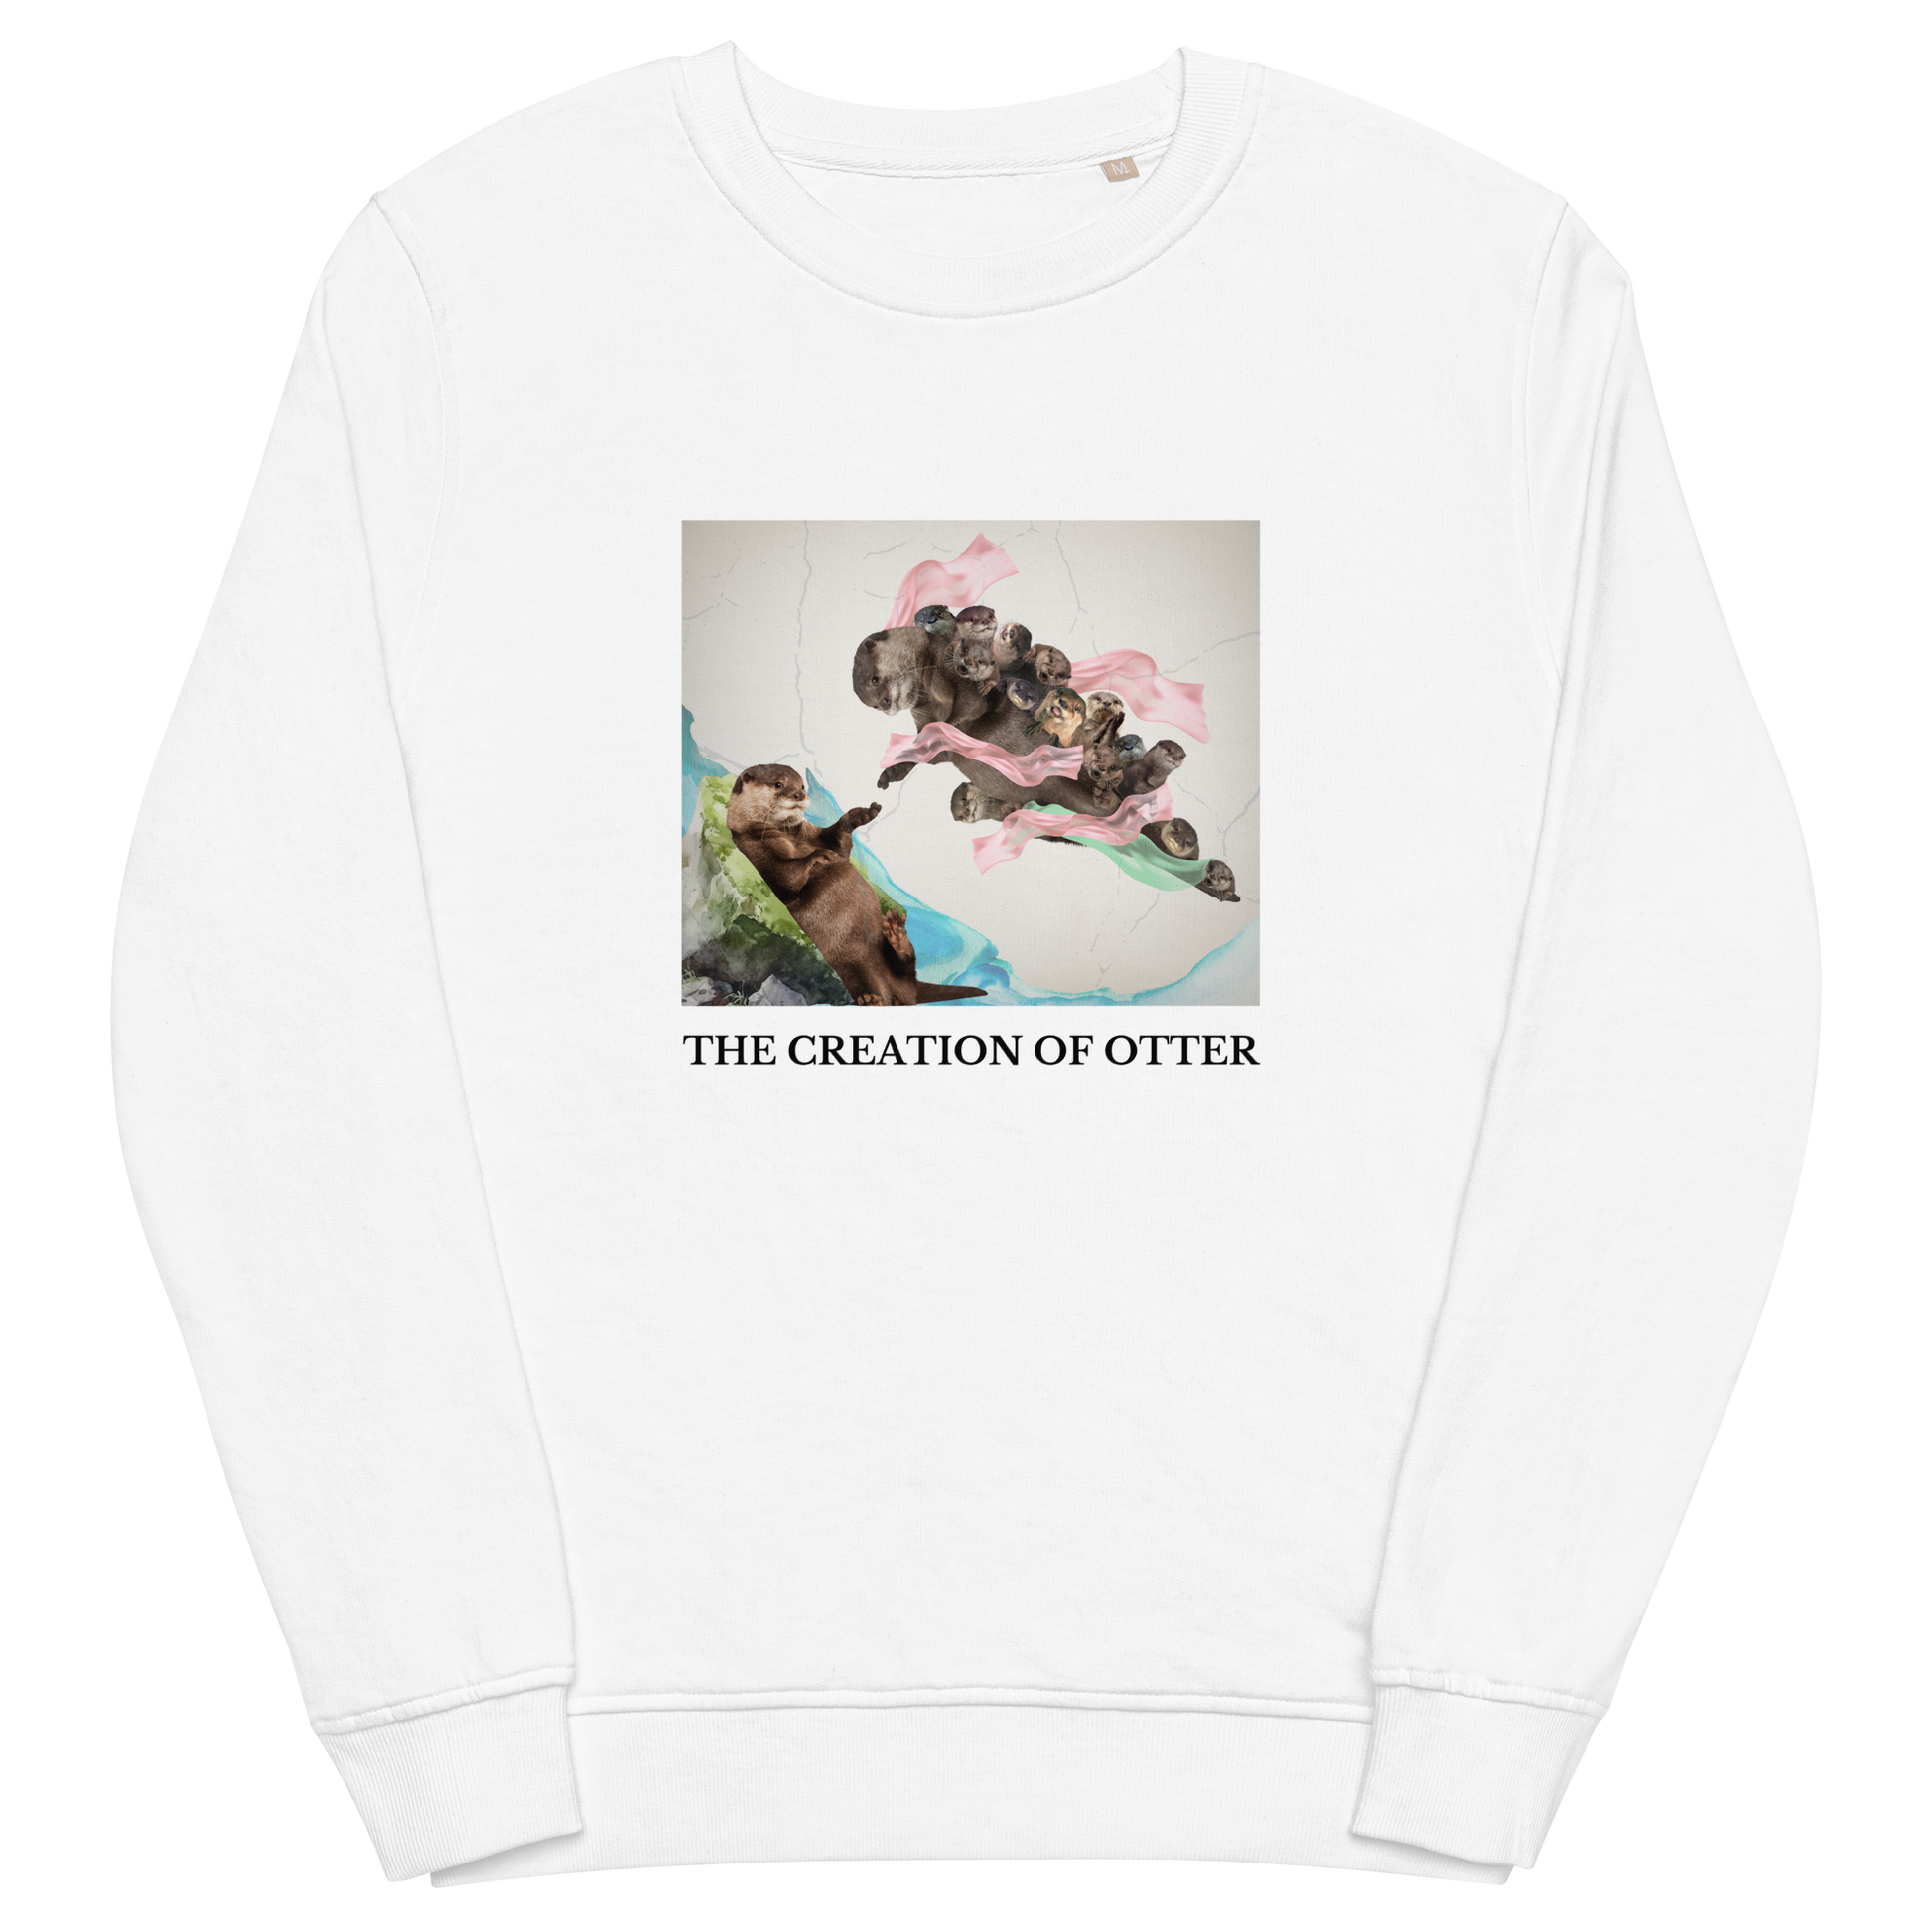 White Organic Otter Sweatshirt featuring a playful The Creation of Otter parody of Michelangelo's masterpiece - Artsy/Funny Graphic Otter Sweatshirts - Boozy Fox